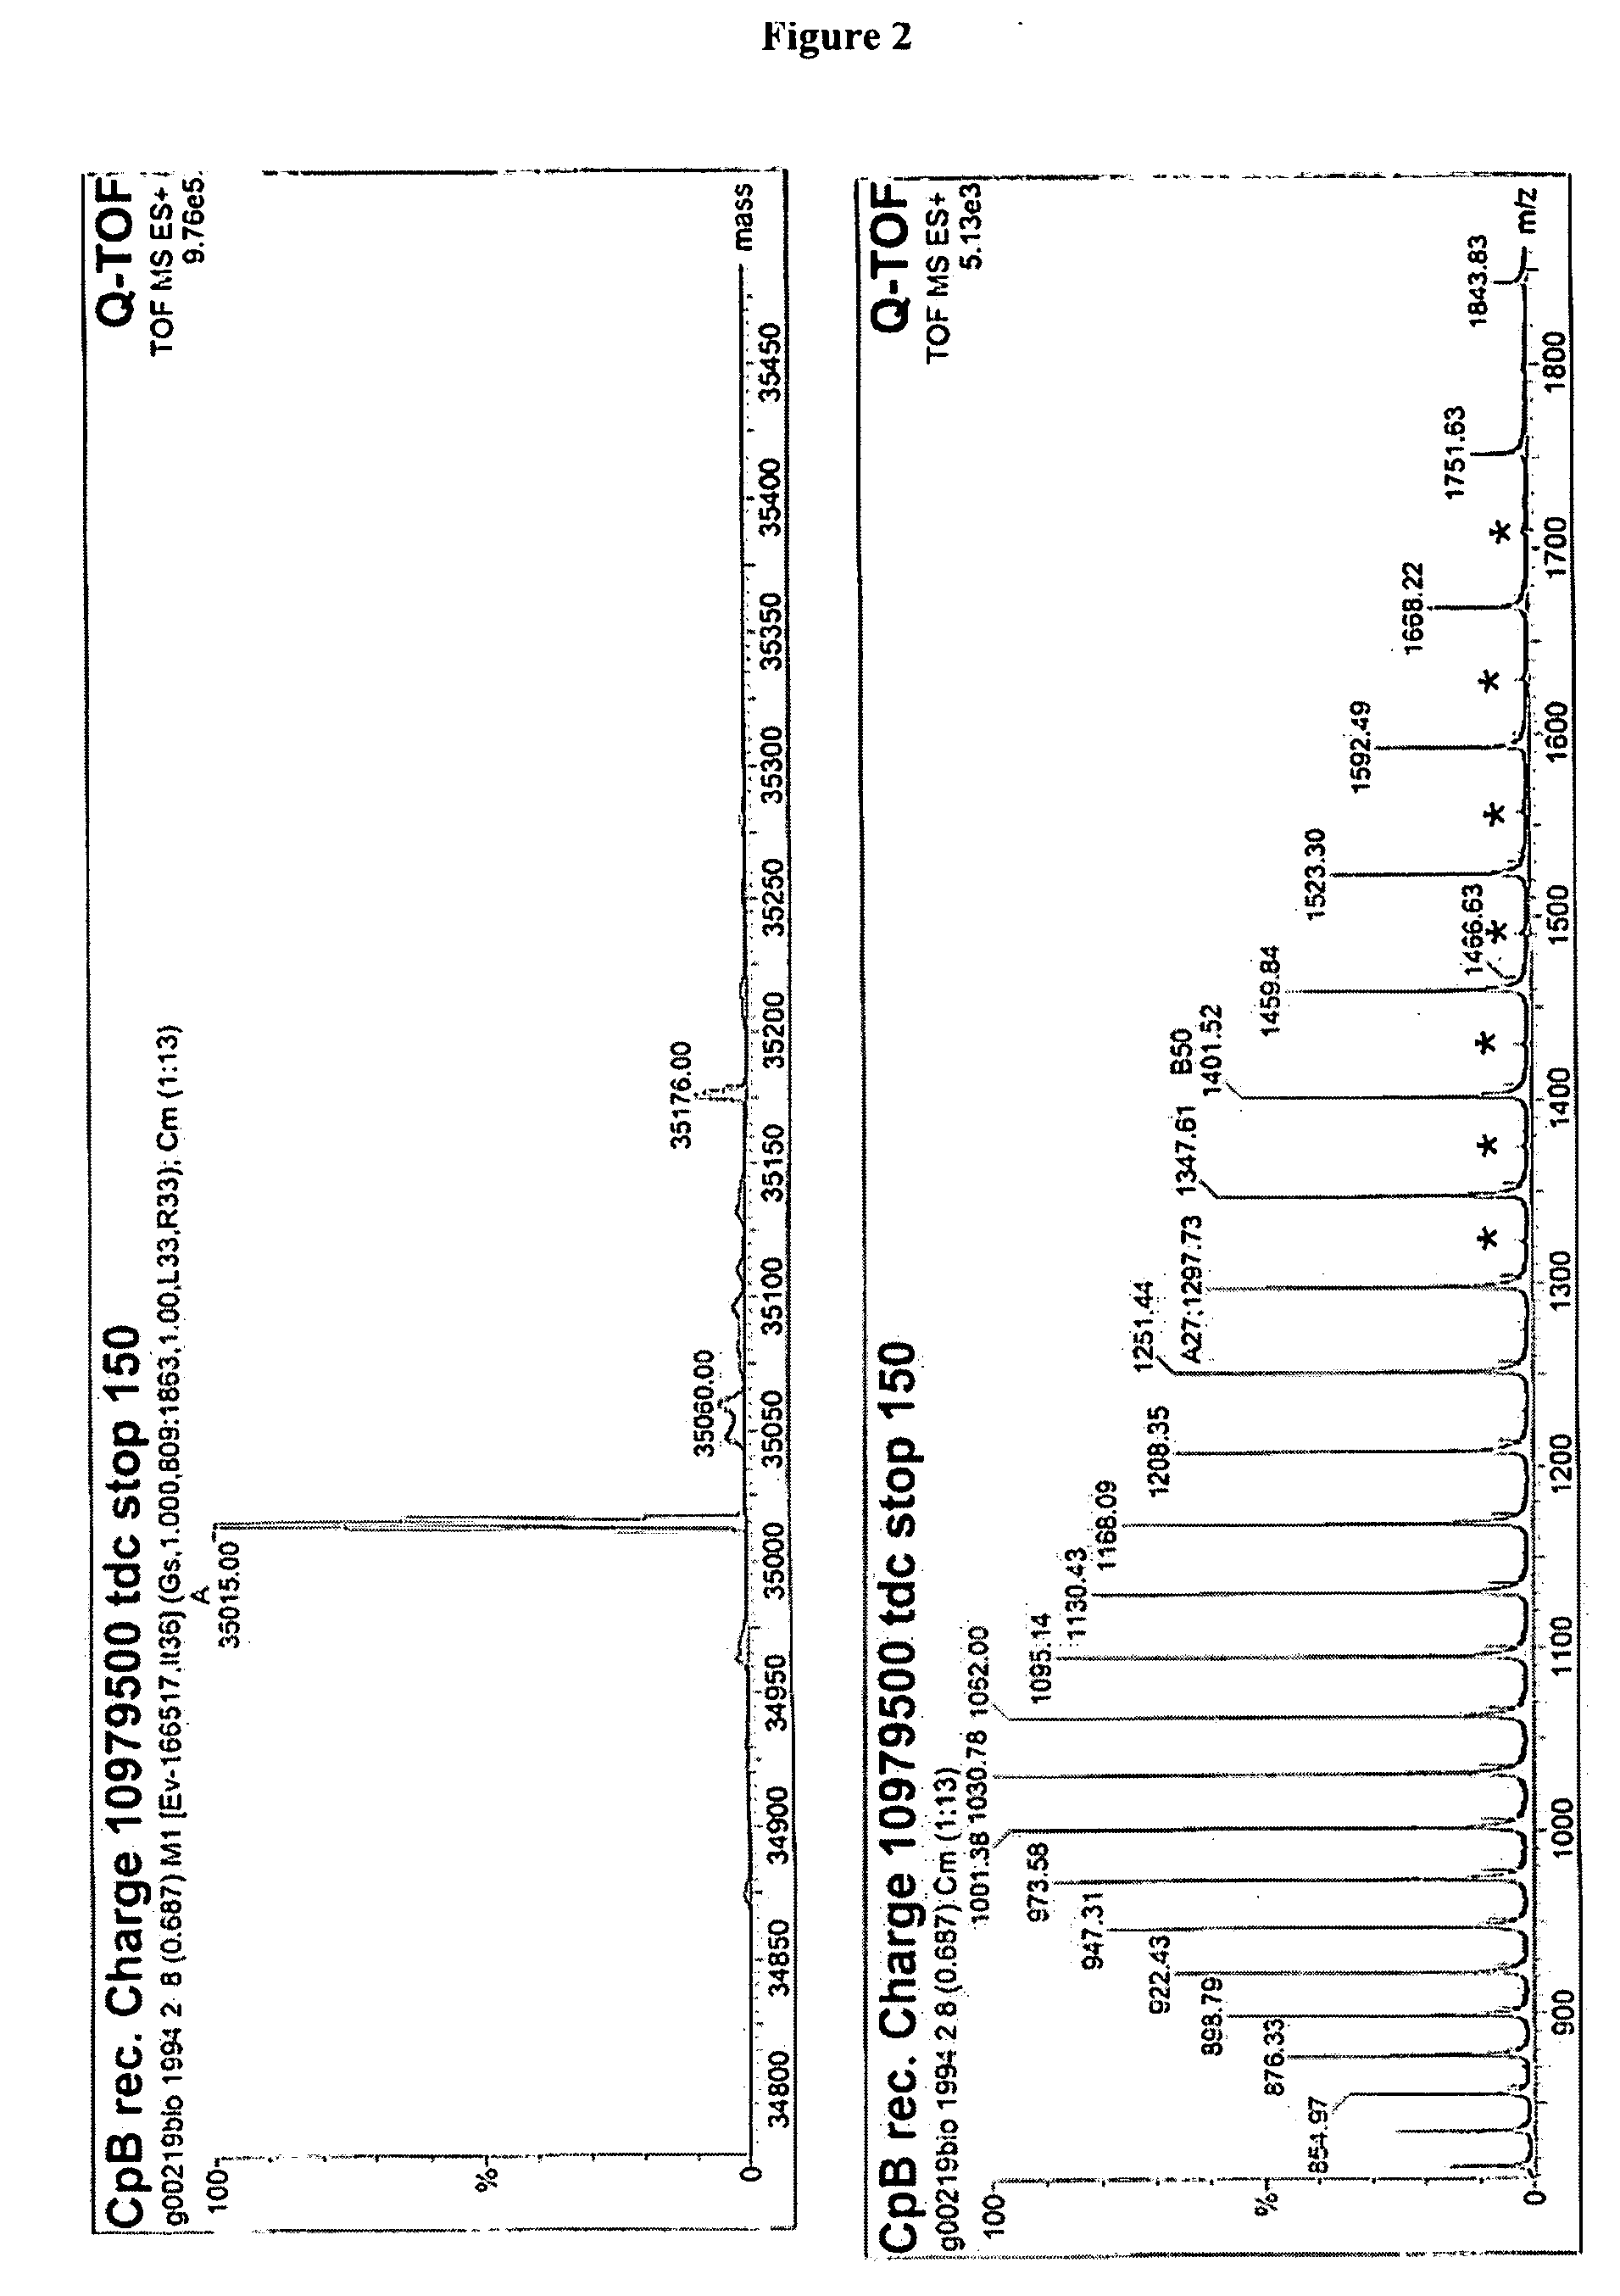 Recombinantly expressed carboxypeptidase B and purification thereof